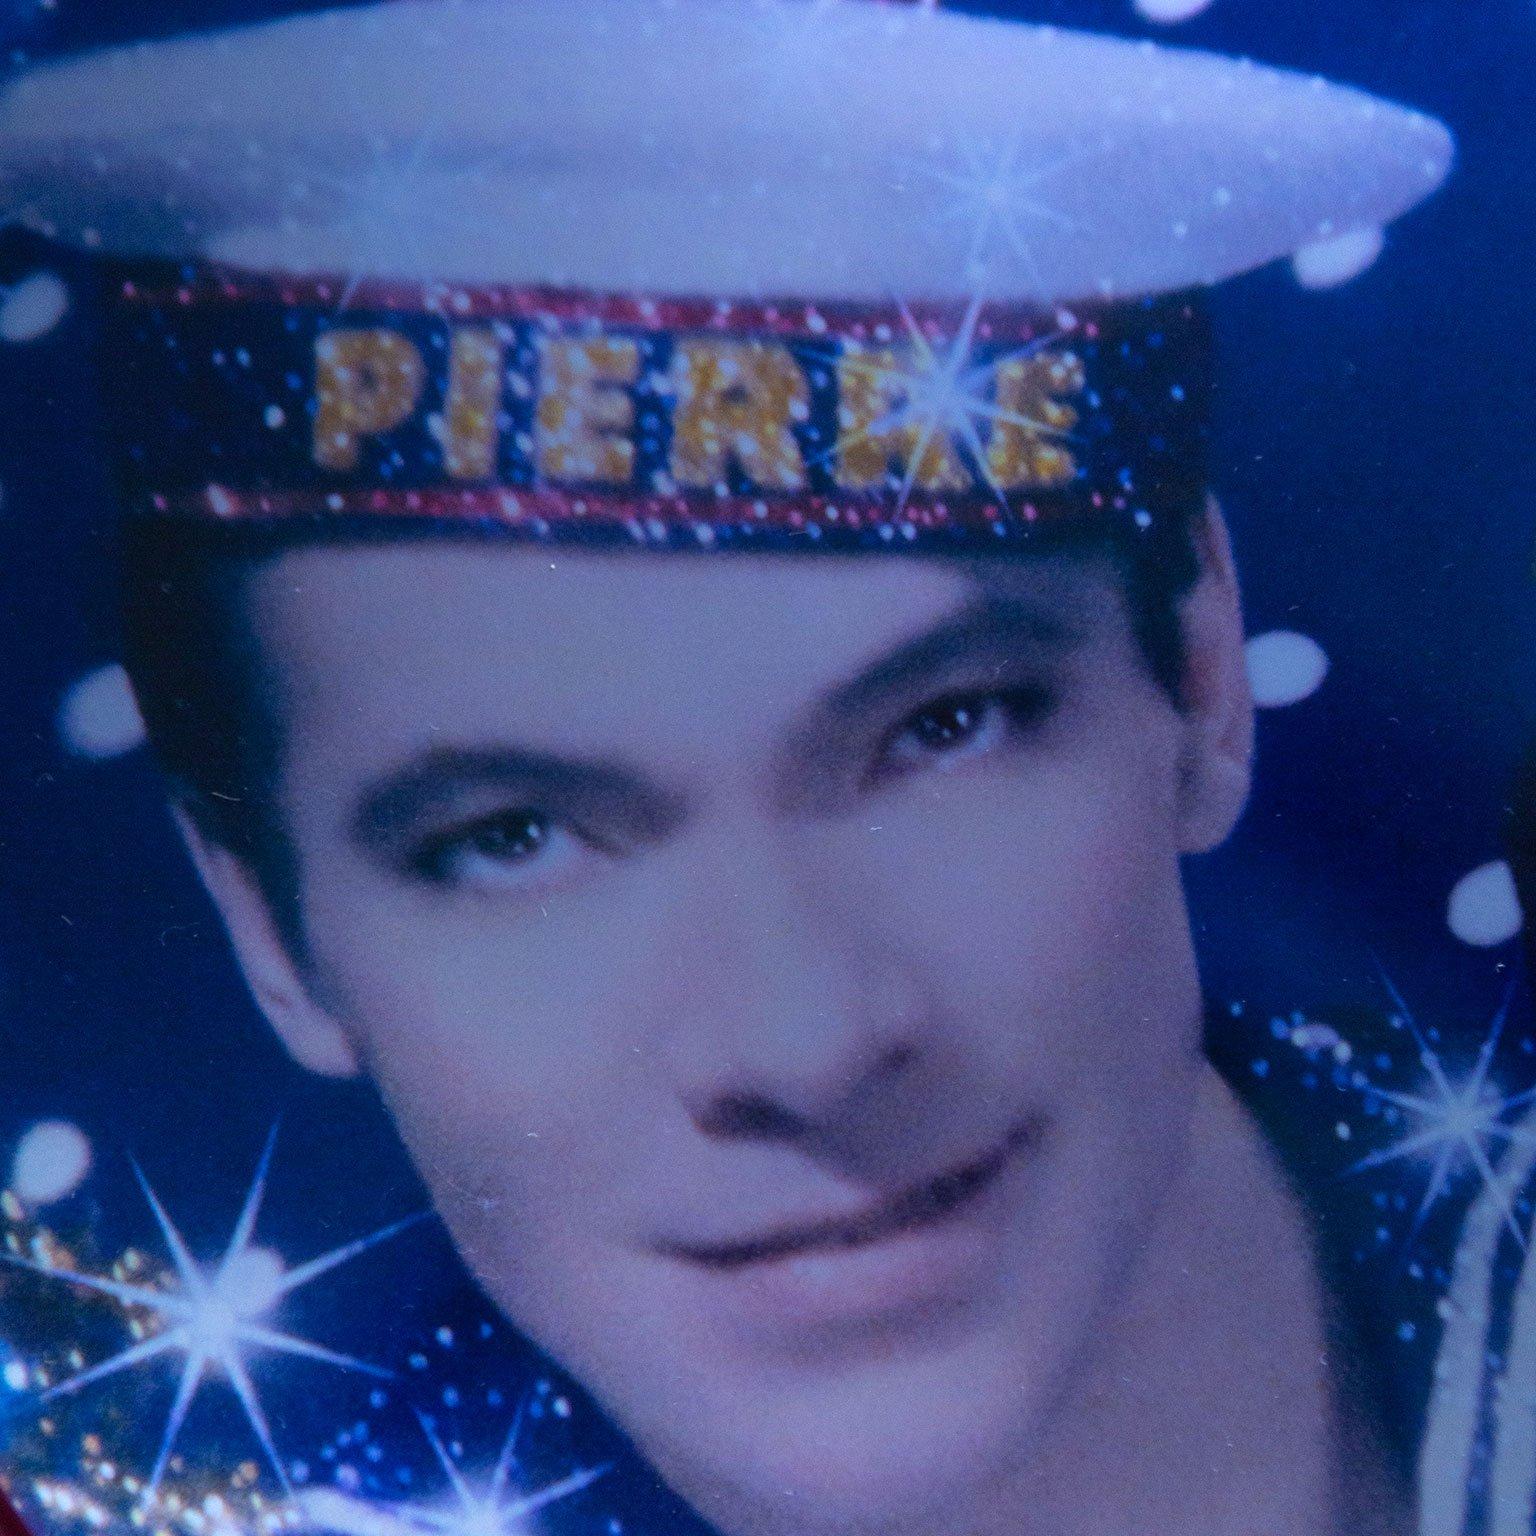 Pierre & Gilles (Pierre Commoy and Gilles Blanchard) began their creative collaboration in France during the late 1970’s. Together they created a vivid fantasy world of their own, a fusion of painting and photography, pop culture and art history,